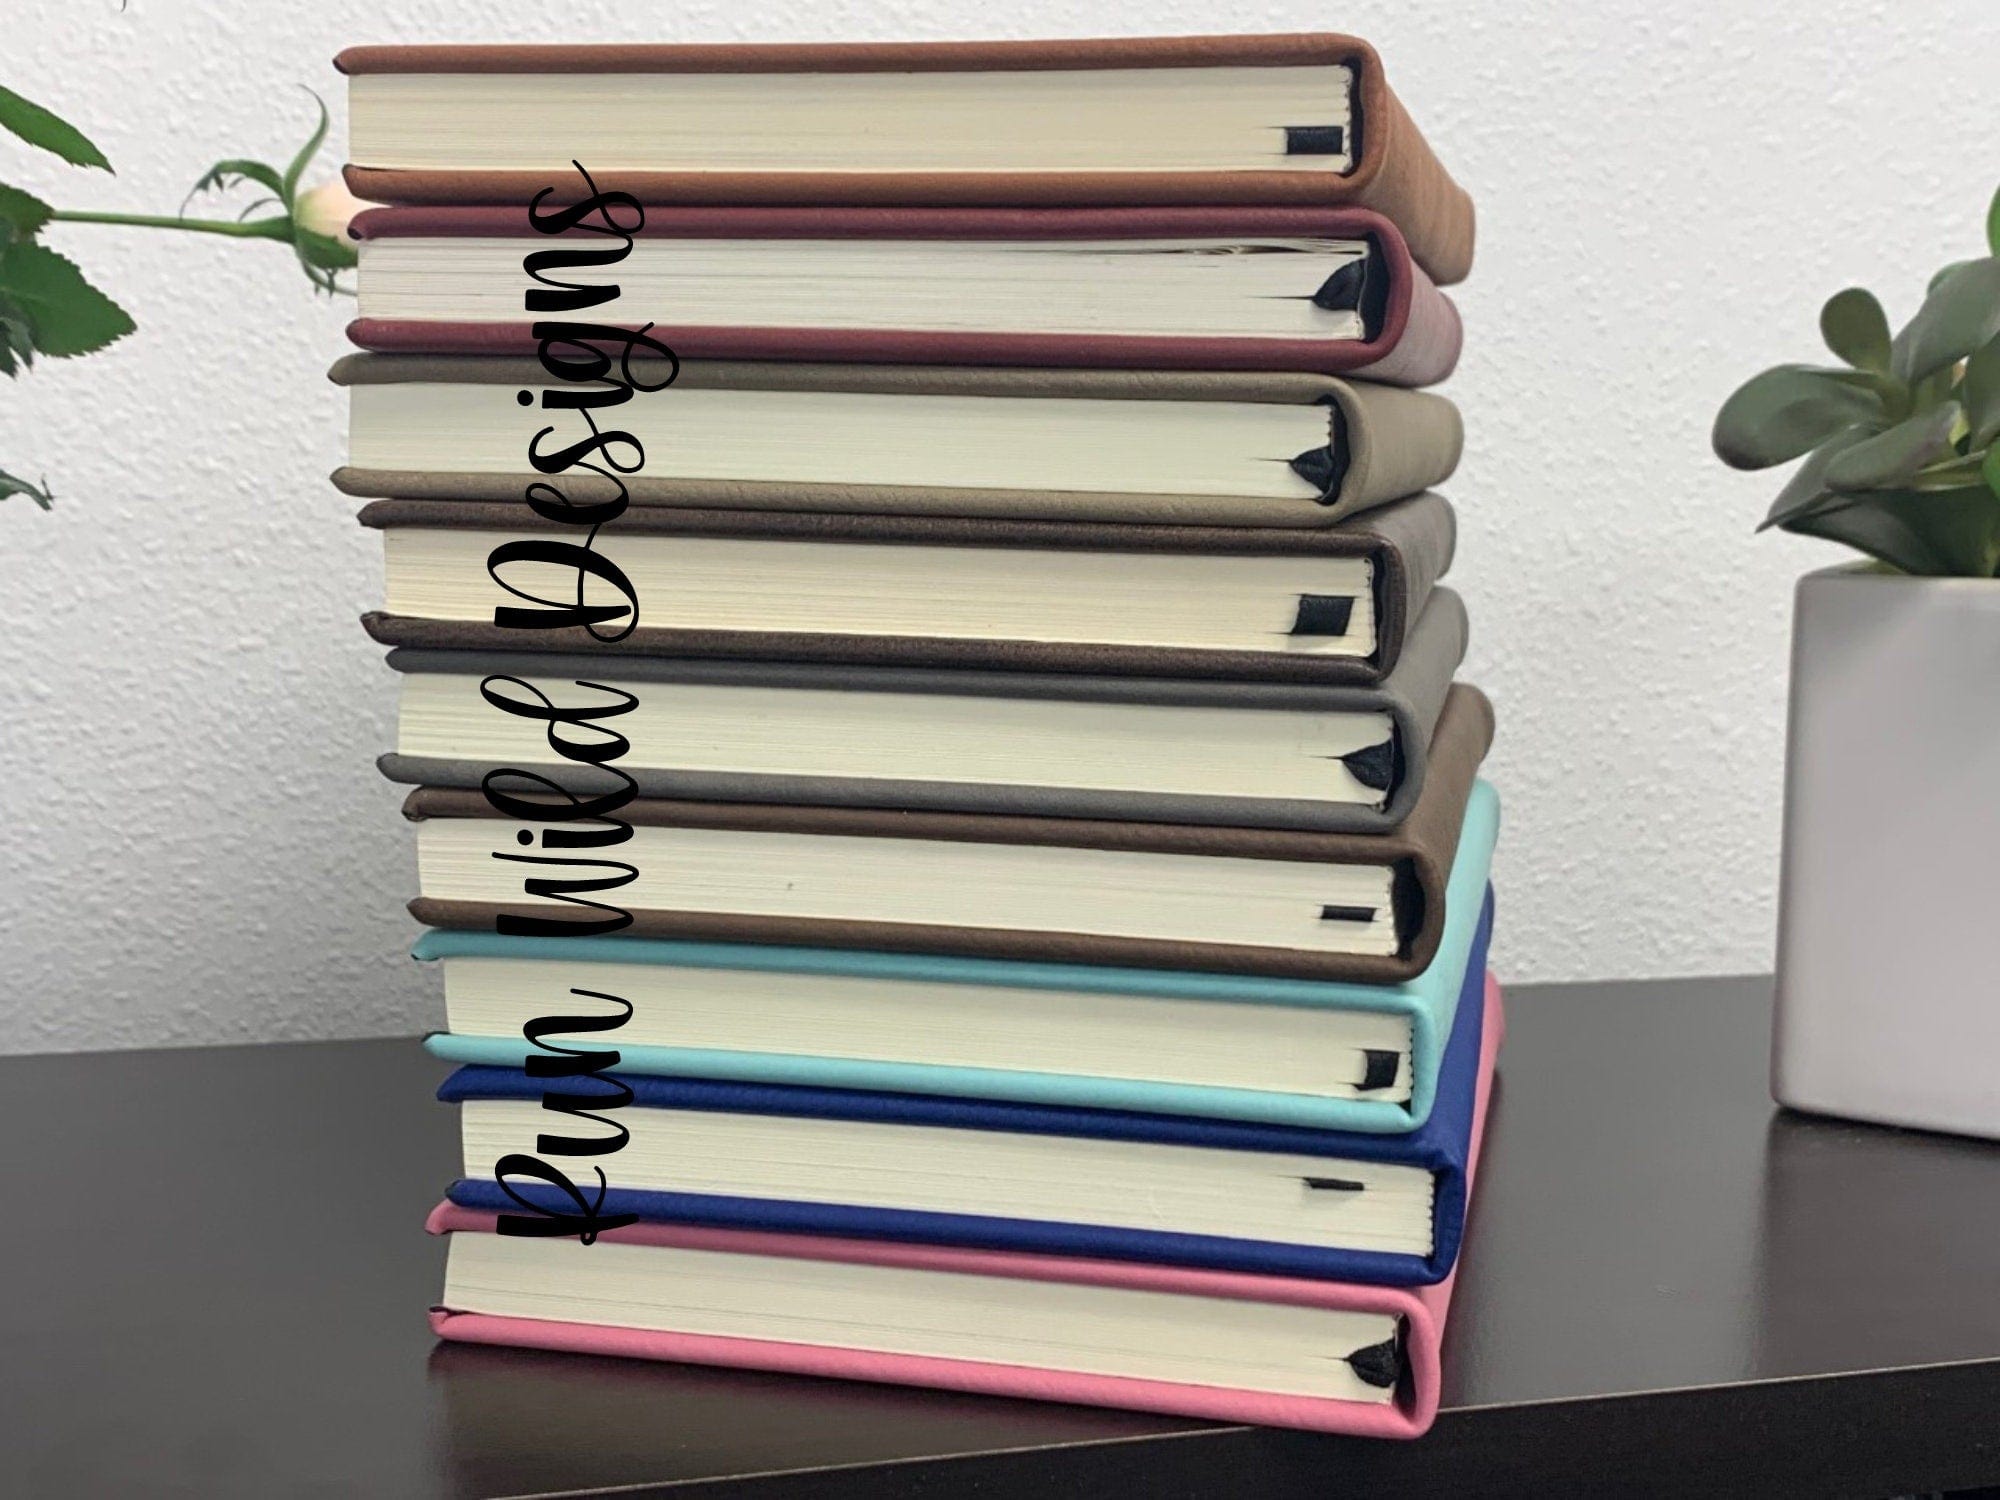 Leatherette journal Leatherette Journal Name Engraved Leatherette Floral Journal Personalized